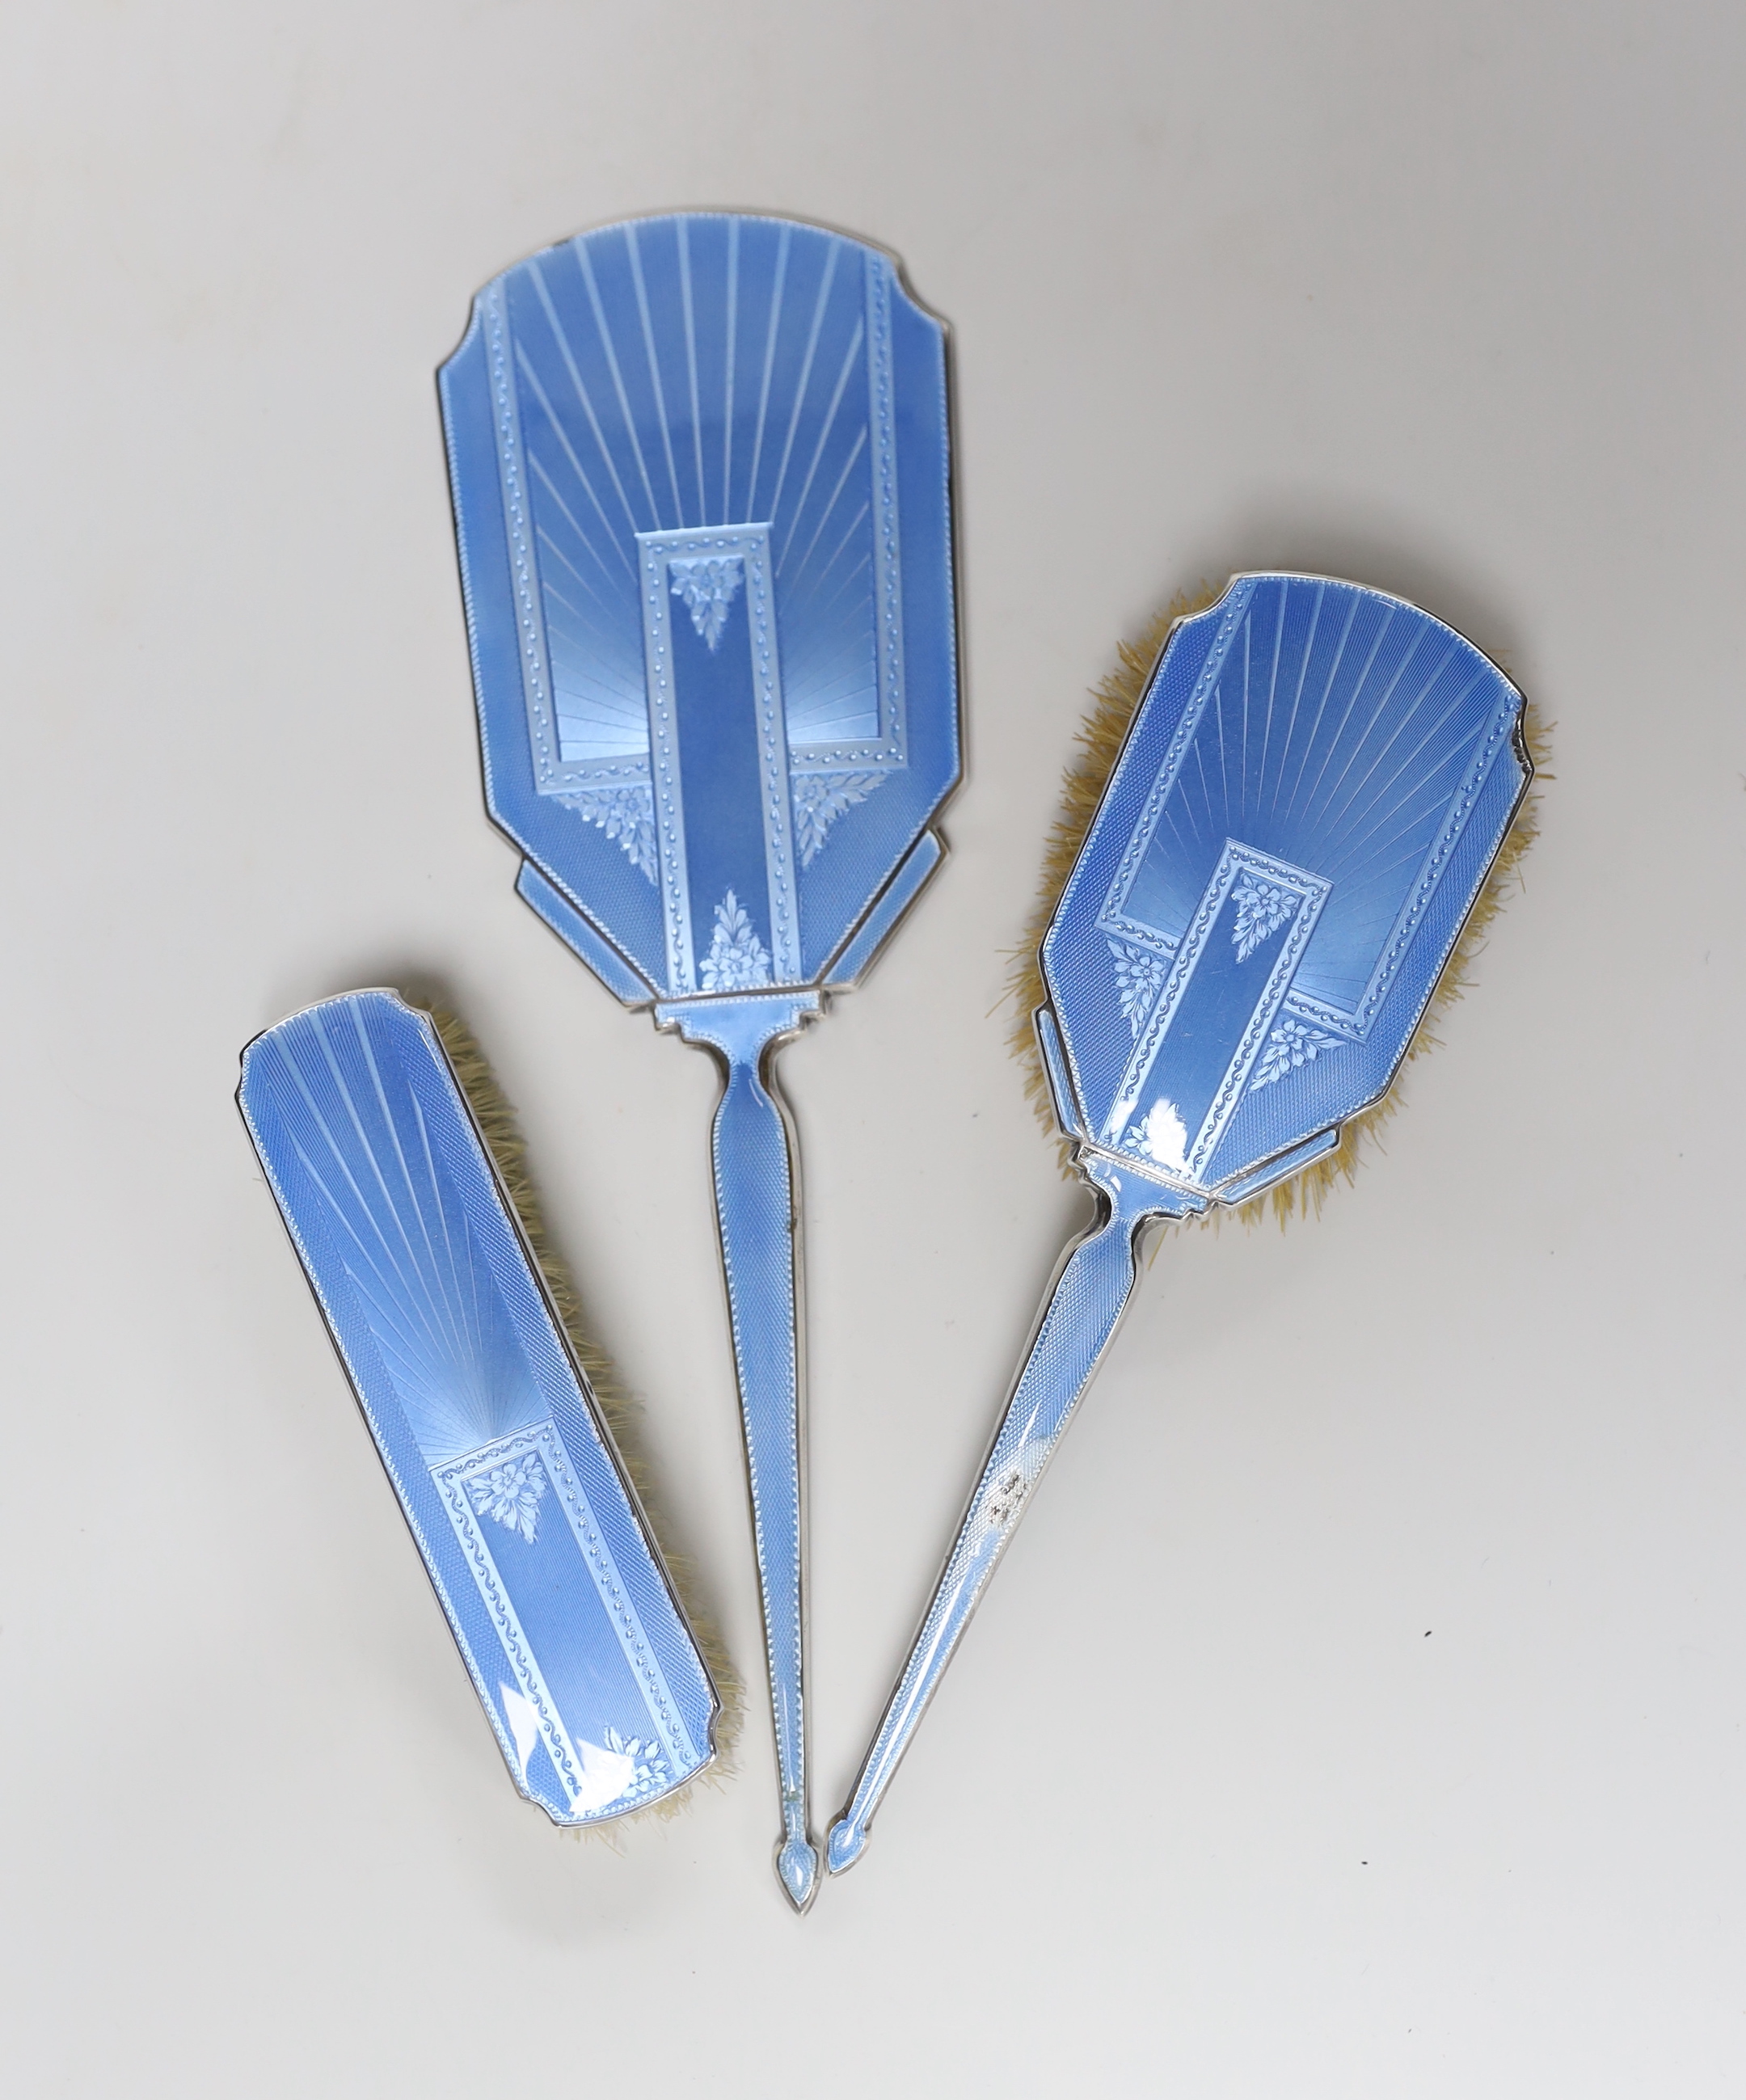 A George V Art Deco silver and blue guilloche enamel mounted three piece mirror and brush set, C.S. Green & Co, Birmingham, 1933, mirror 29.6cm.                                                                            